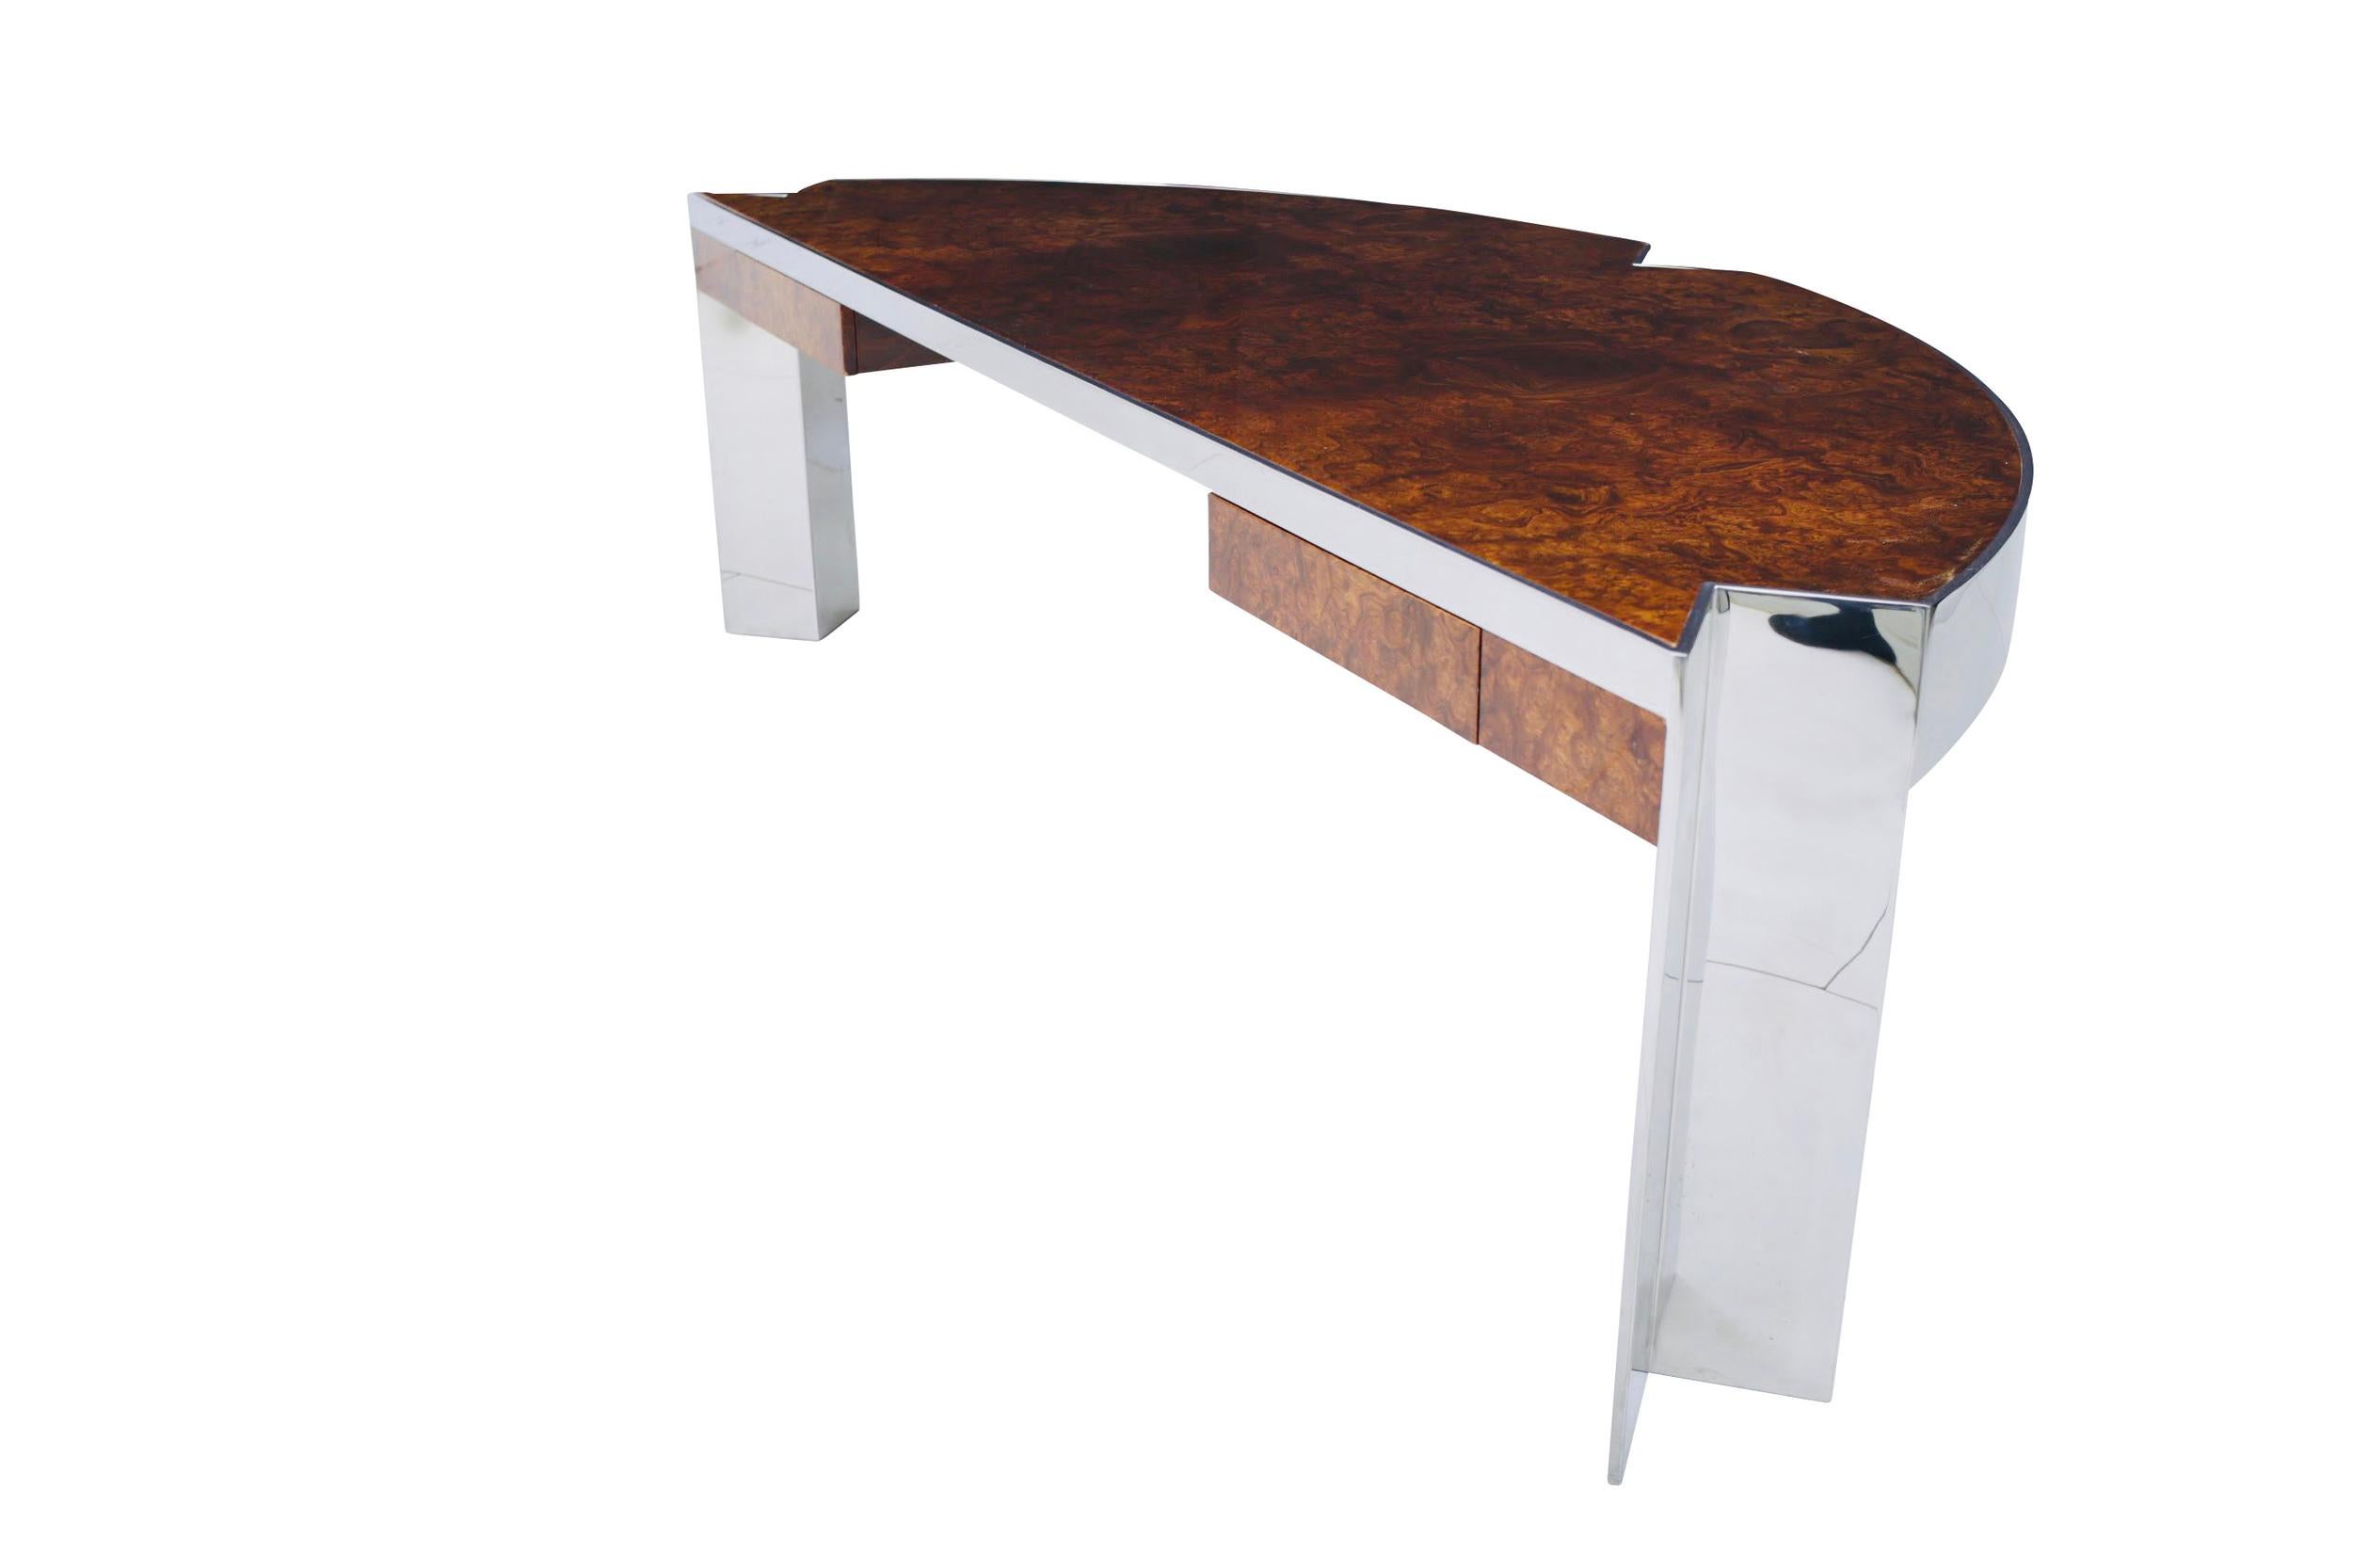 Late 20th Century ‘Mezzaluna” Pace Collection Burl Wood and Stainless Steel Desk